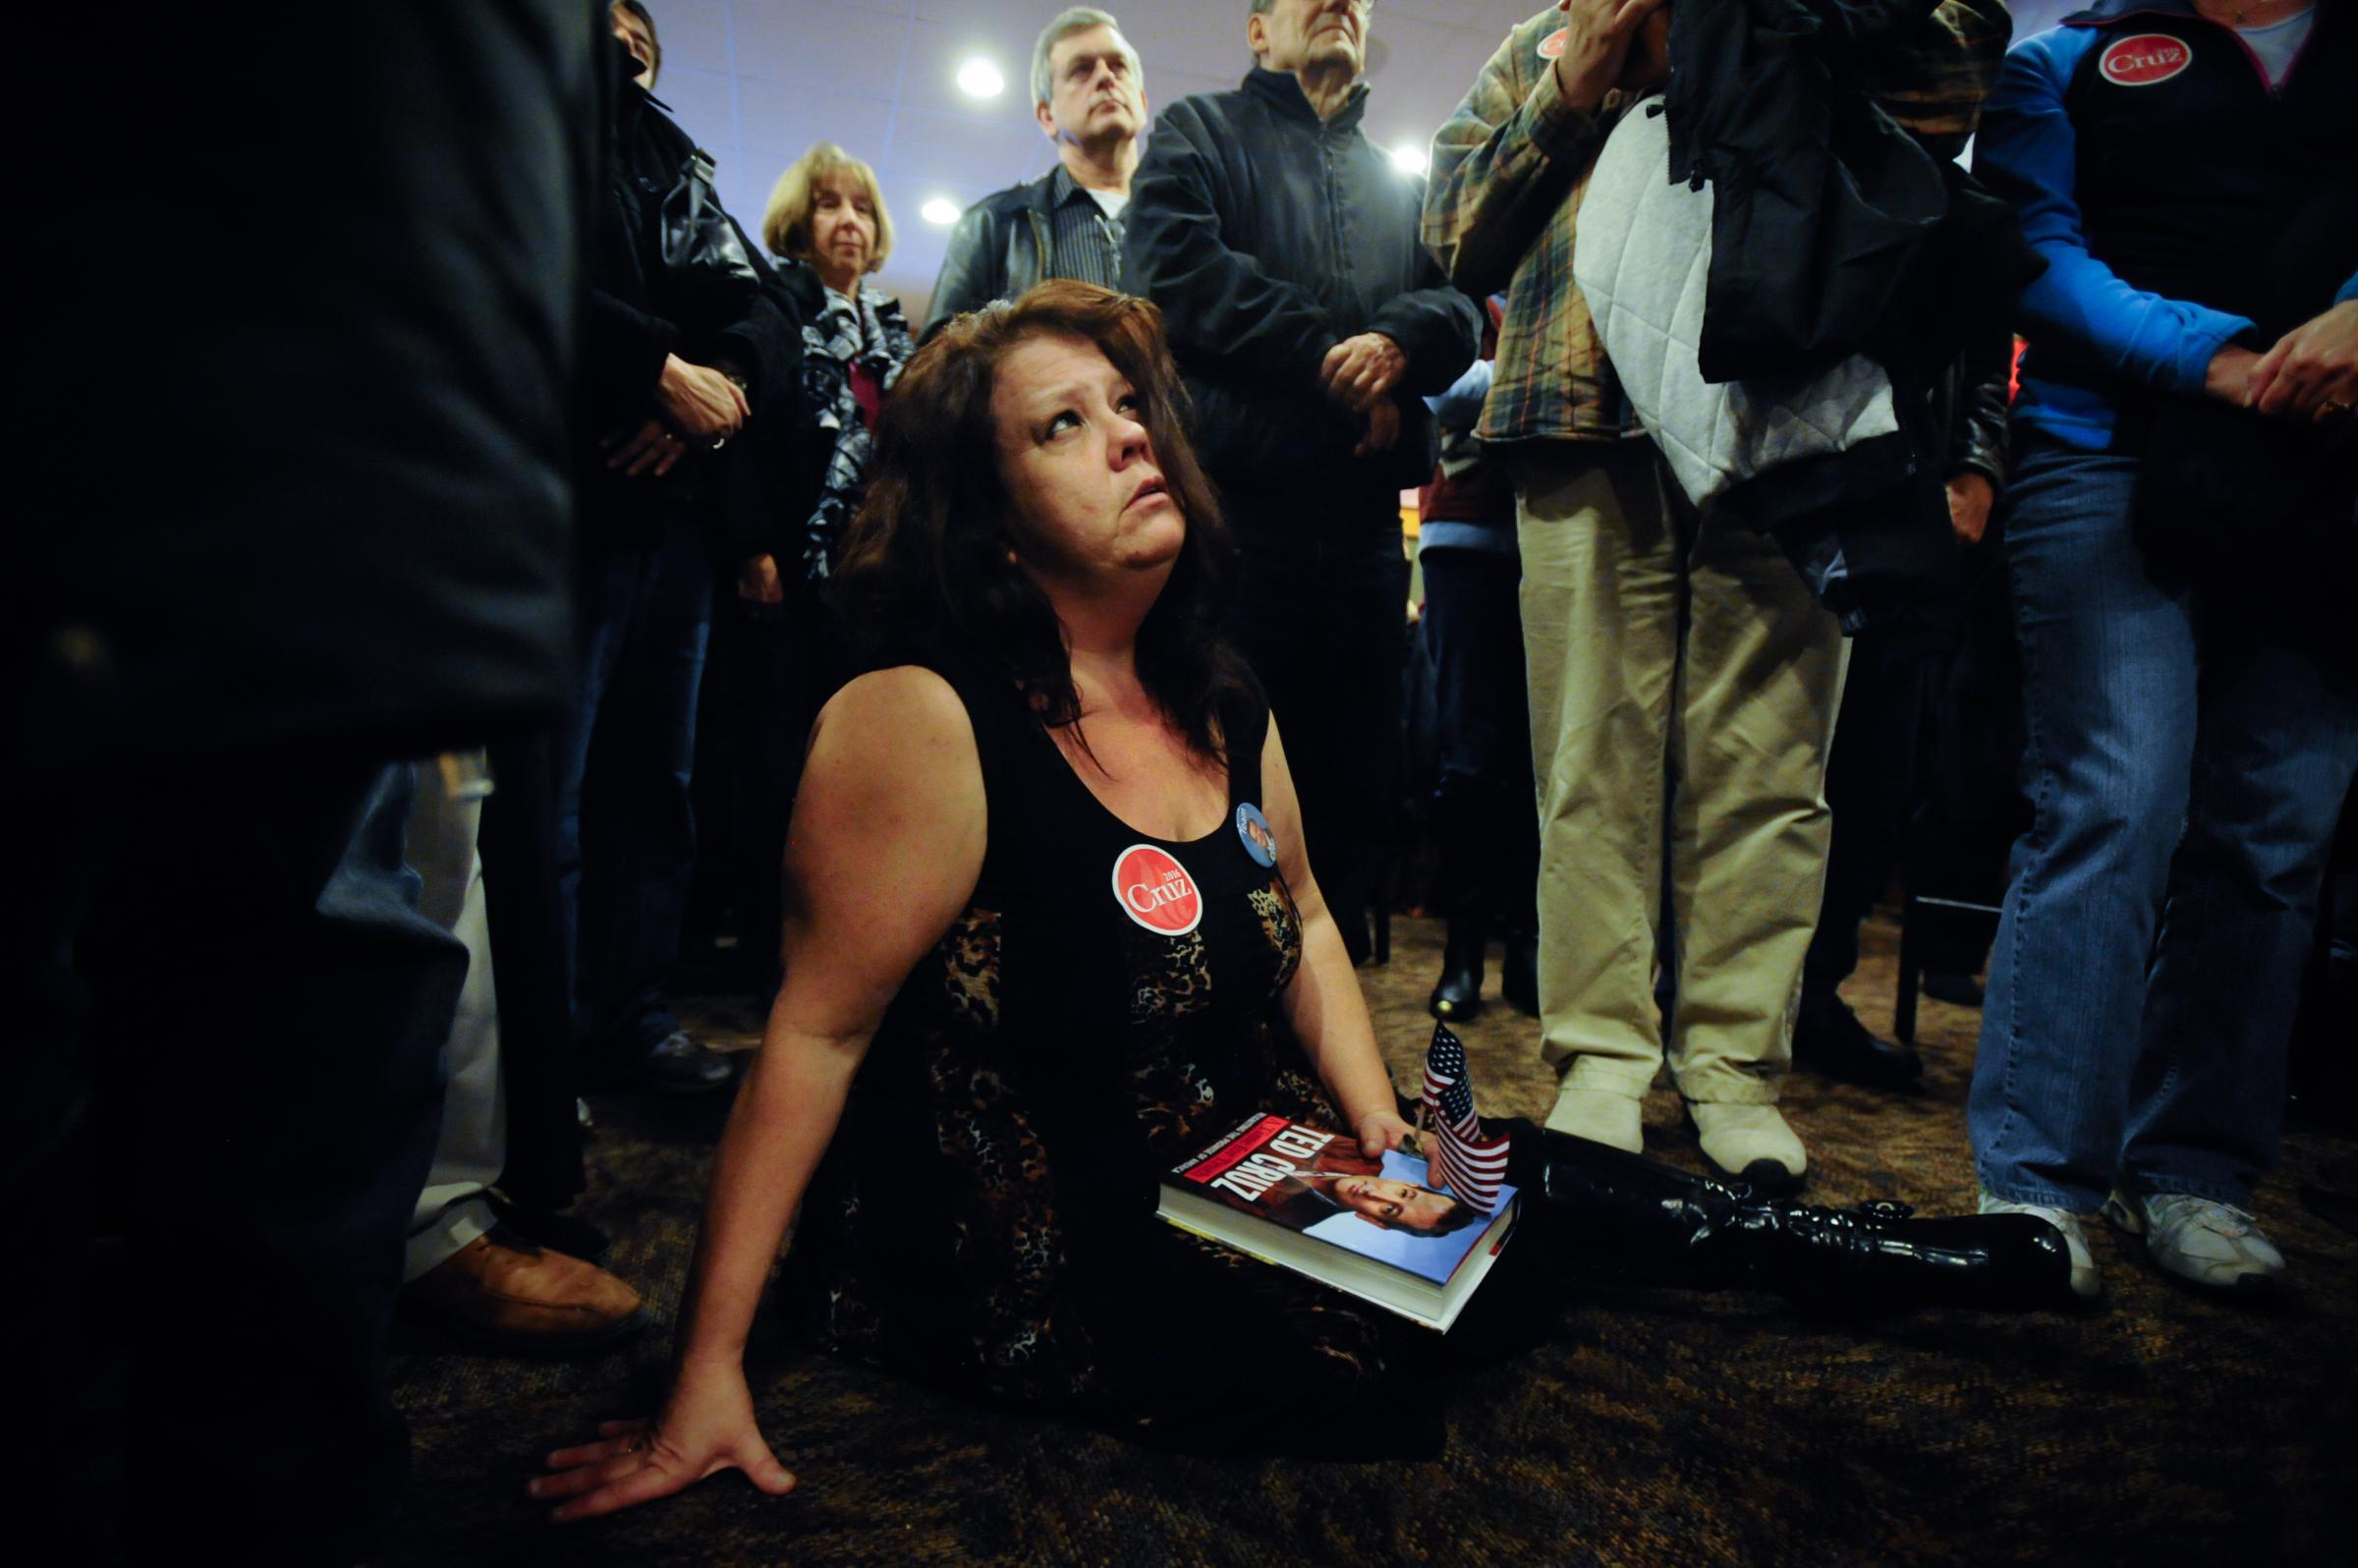 Iowan Debra Sage, a supporter of Republican presidential candidate Ted Cruz, listens as Cruz speaks at a campaign stop at a Pizza Ranch restaurant in Newton, Iowa Nov. 29, 2015.